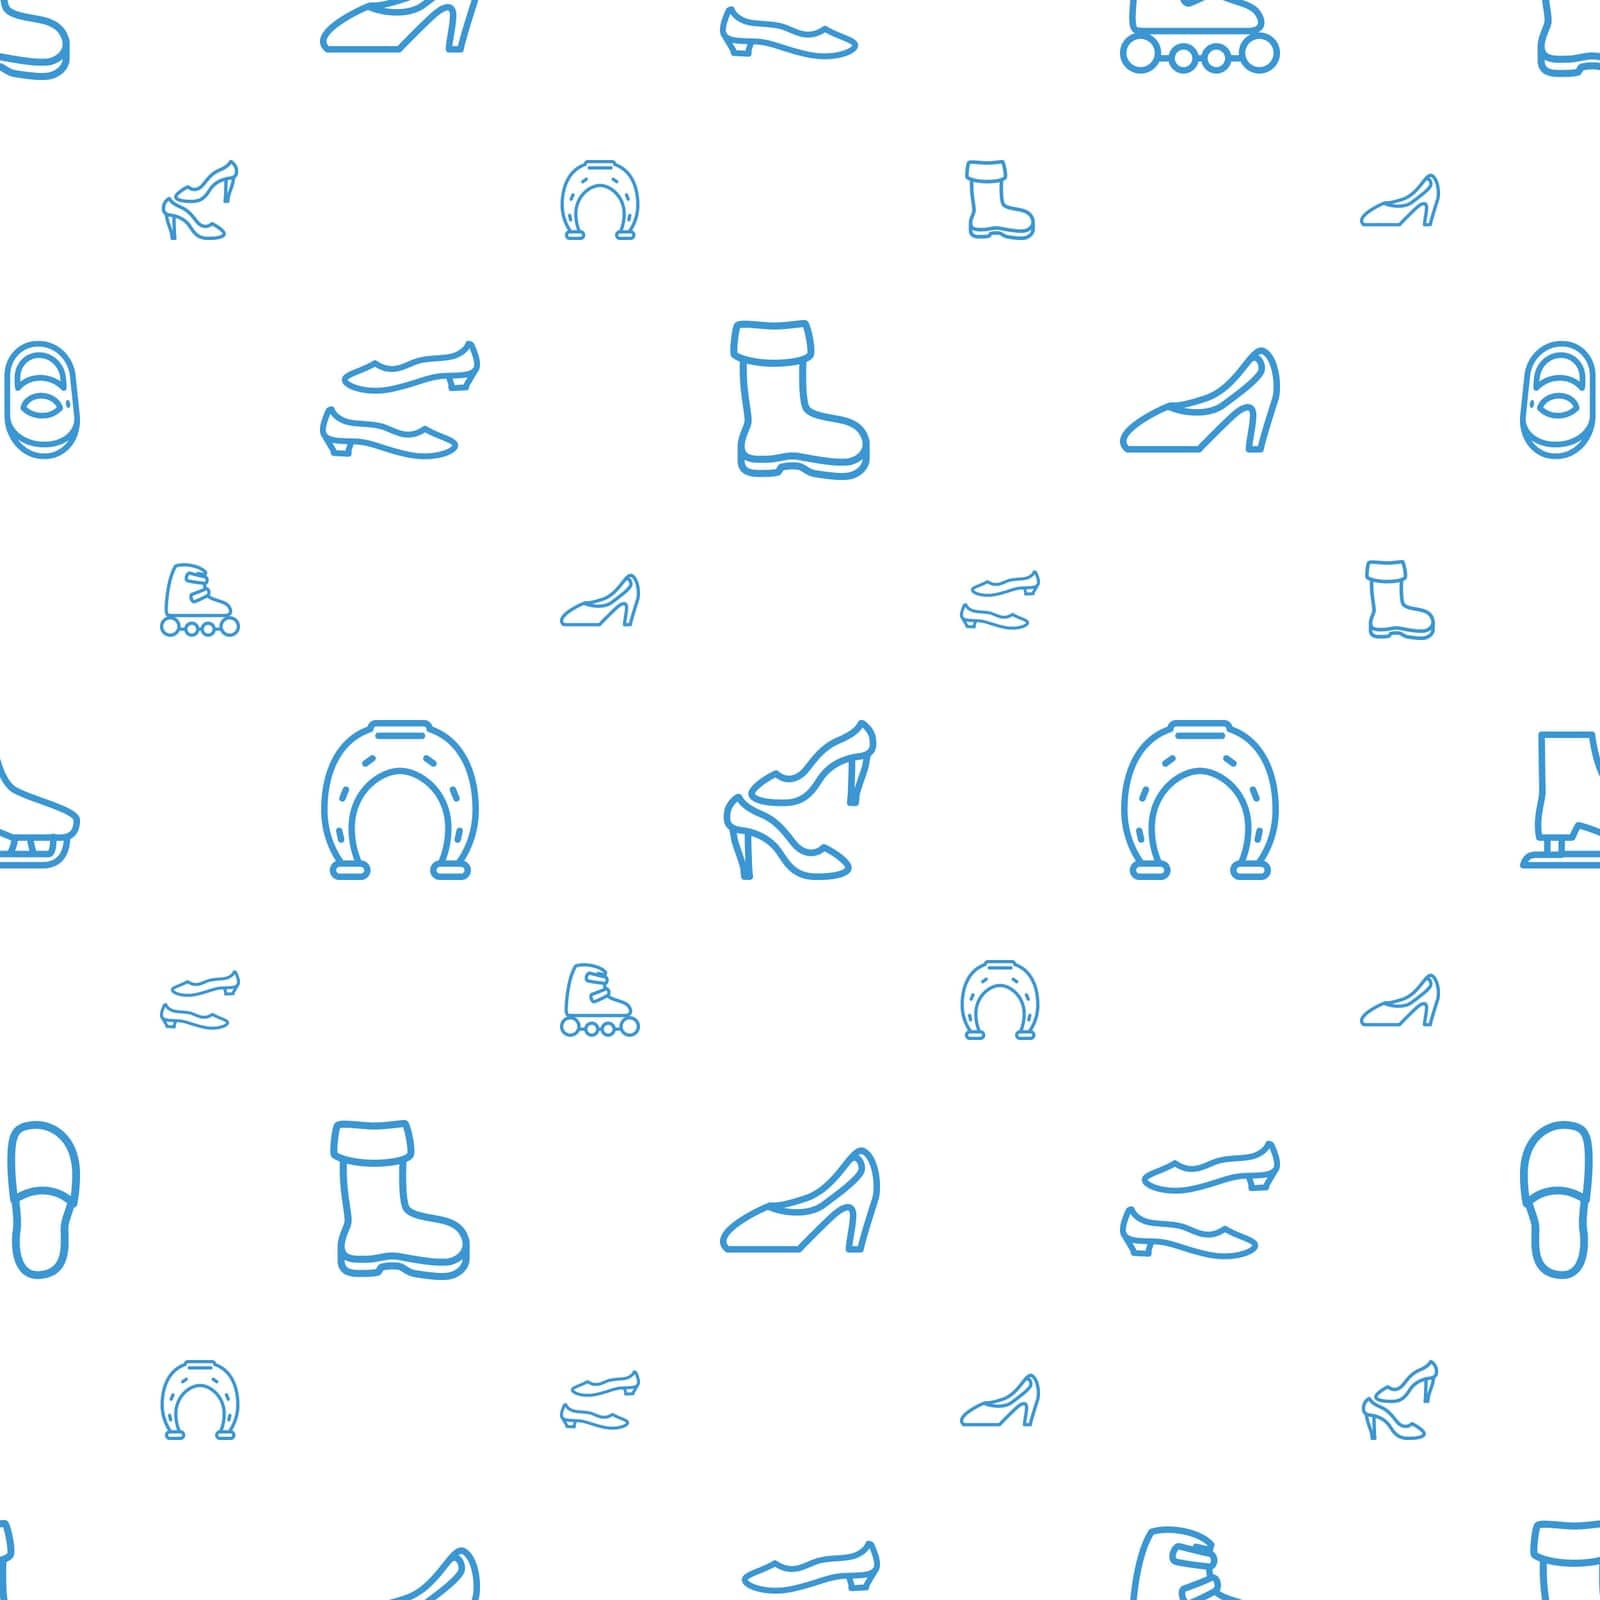 symbol,woman,activity,pattern,icon,sign,isolated,ice,high,white,heel,flat,design,vector,female,boot,rollers,graphic,shoe,elegant,foot,element,footwear,art,set,shape,slippers,black,girl,shoes,horseshoe,background,baby,style,illustration,skate,roller,object,fashion,women